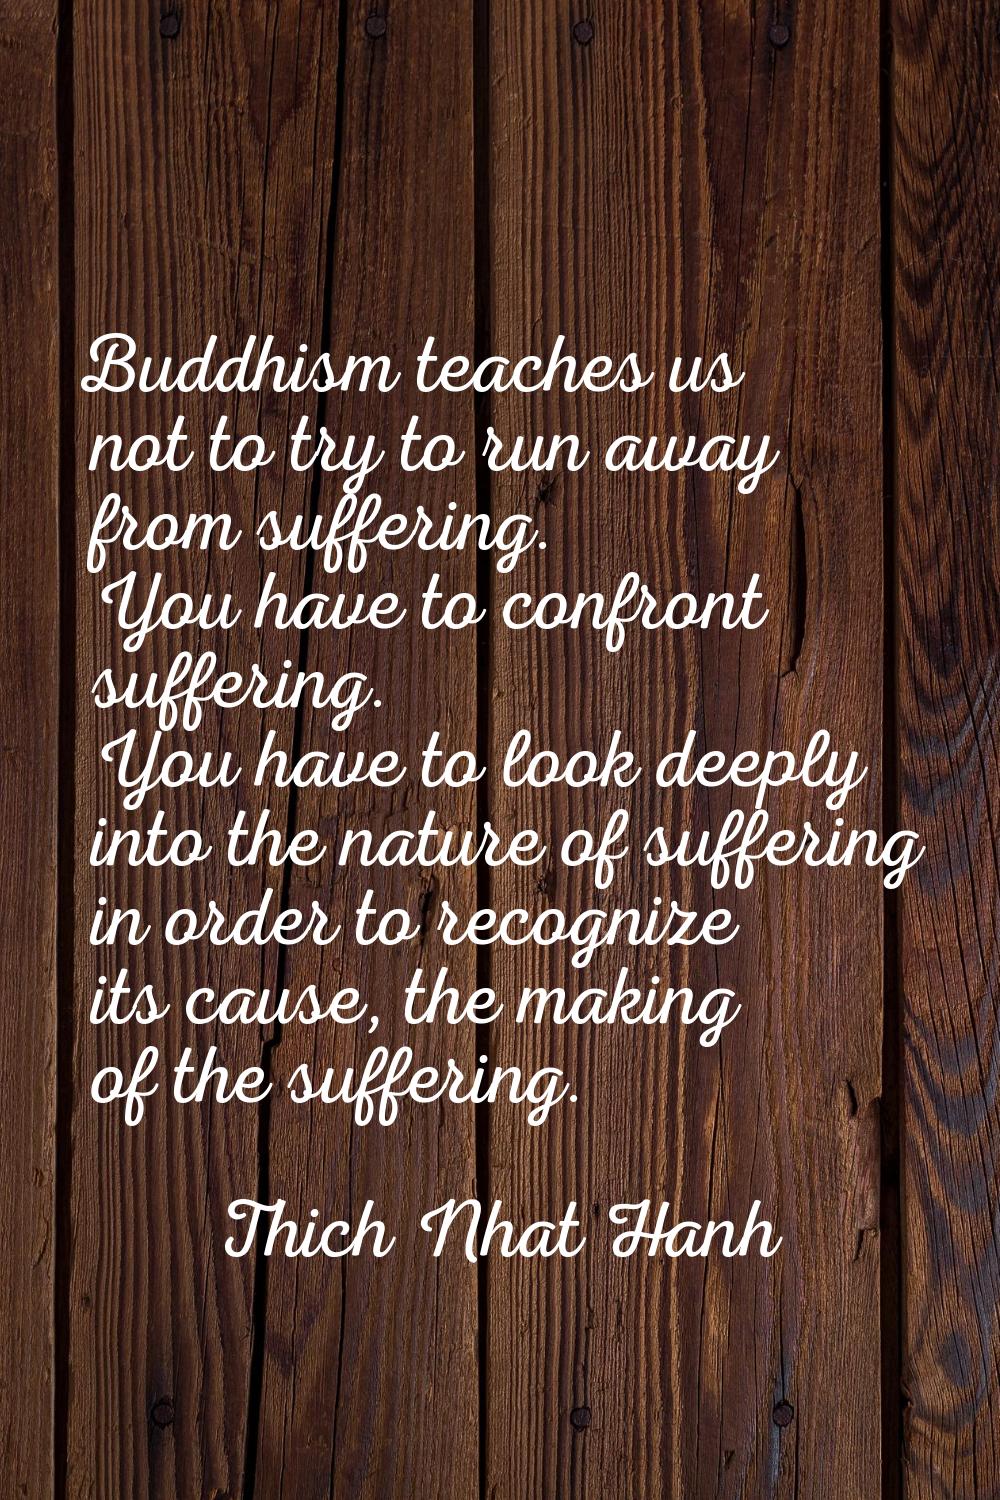 Buddhism teaches us not to try to run away from suffering. You have to confront suffering. You have